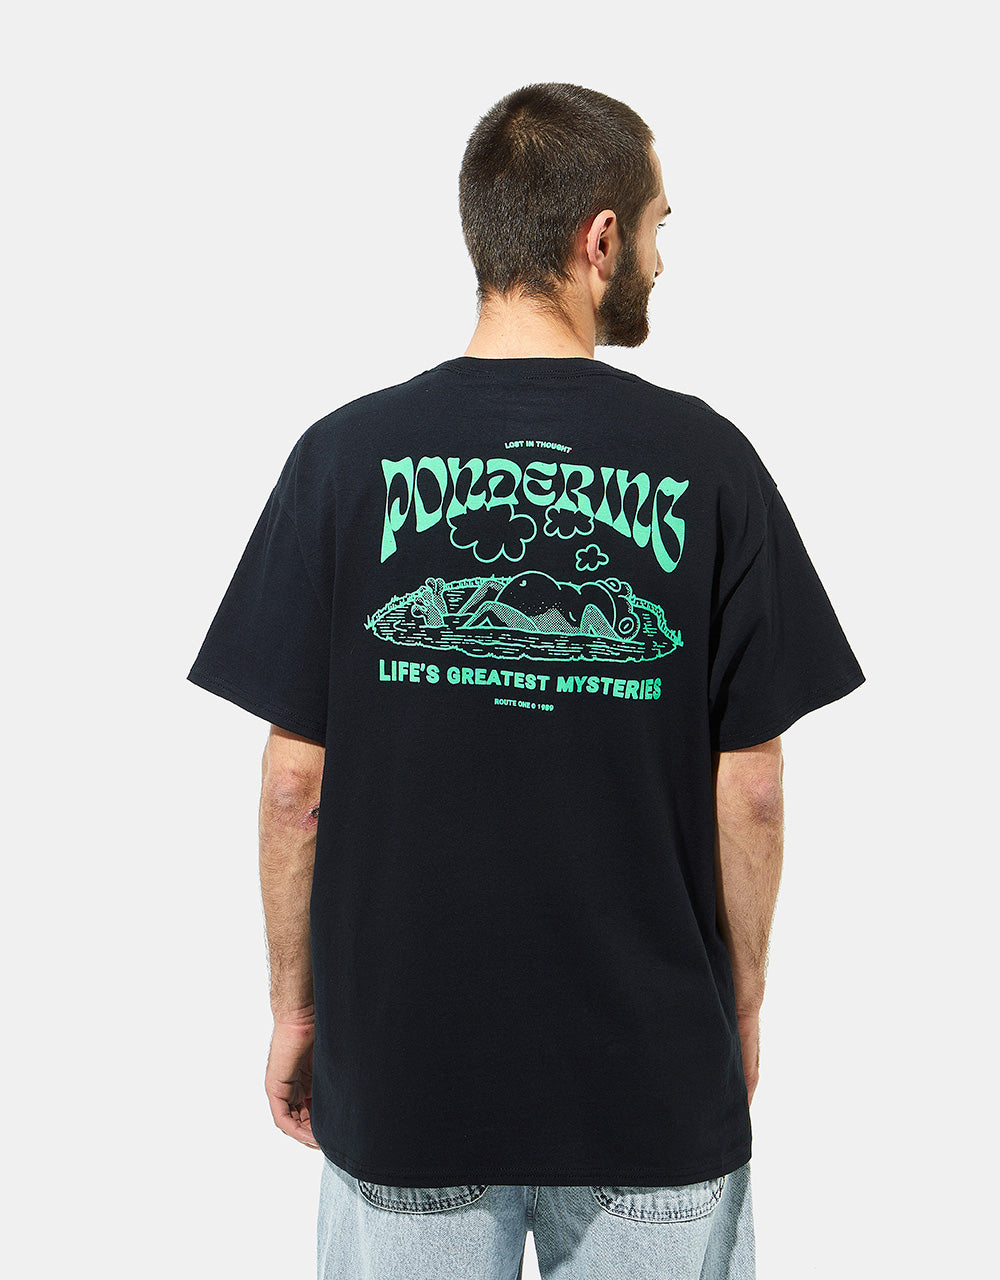 Route One Pondering T-Shirt - Black